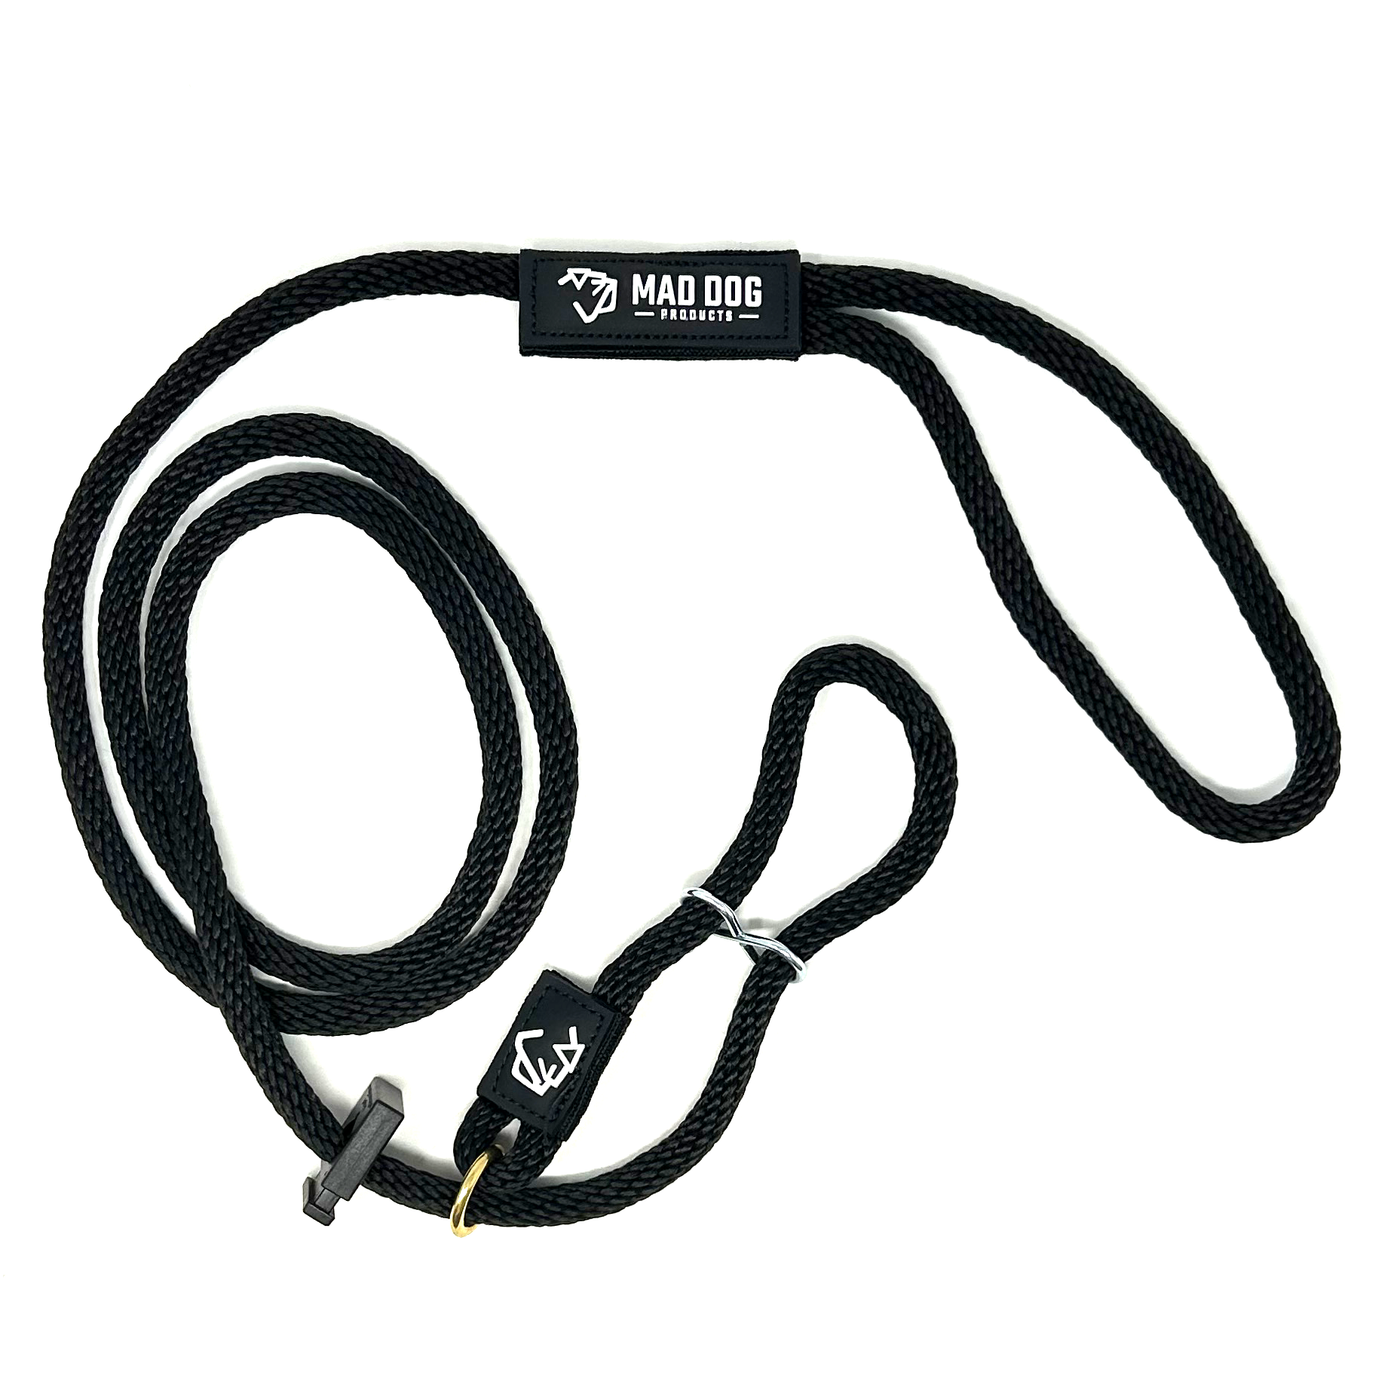 Mad Dog Products 'Easy Leader' Slip Leash - 3/8"